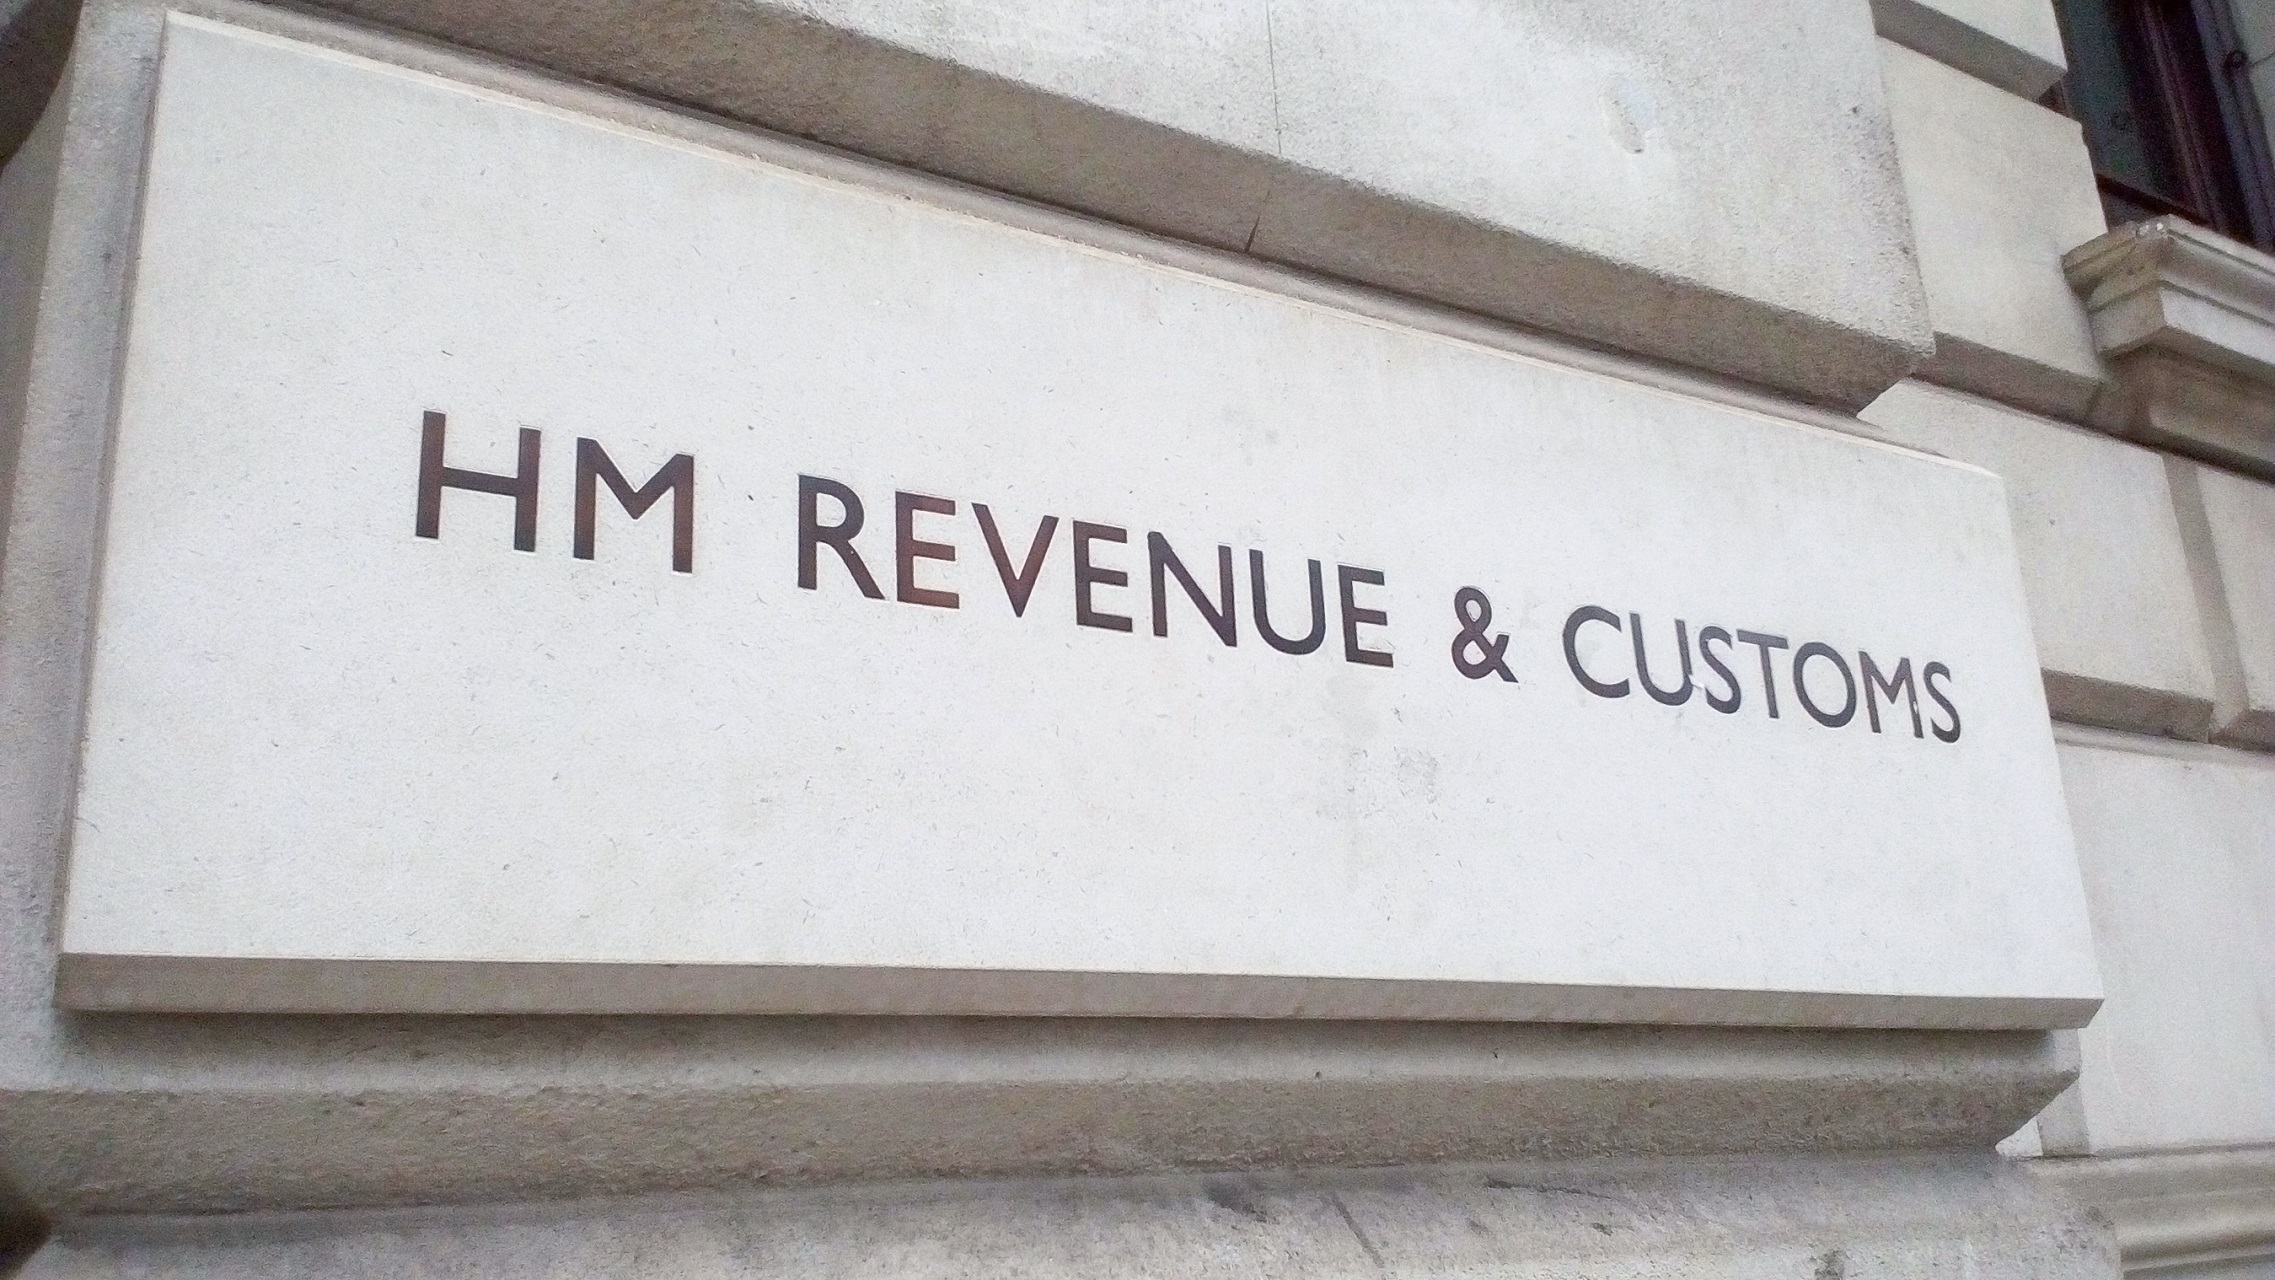 HMRC increases late payment interest rate to 7.5%